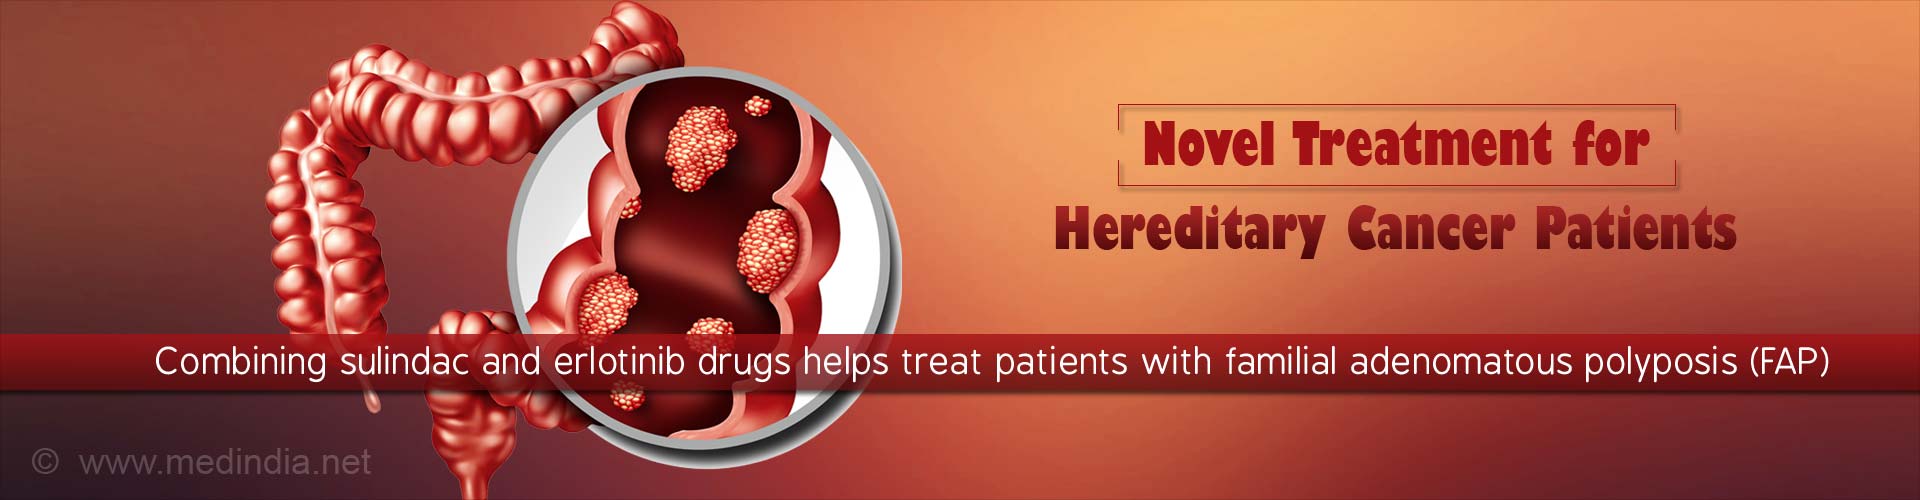 novel treatment for hereditary cancer patients
- combining sulindac and erlotinib drugs helps treat patients with familial adenomatous polyposis (FAP)